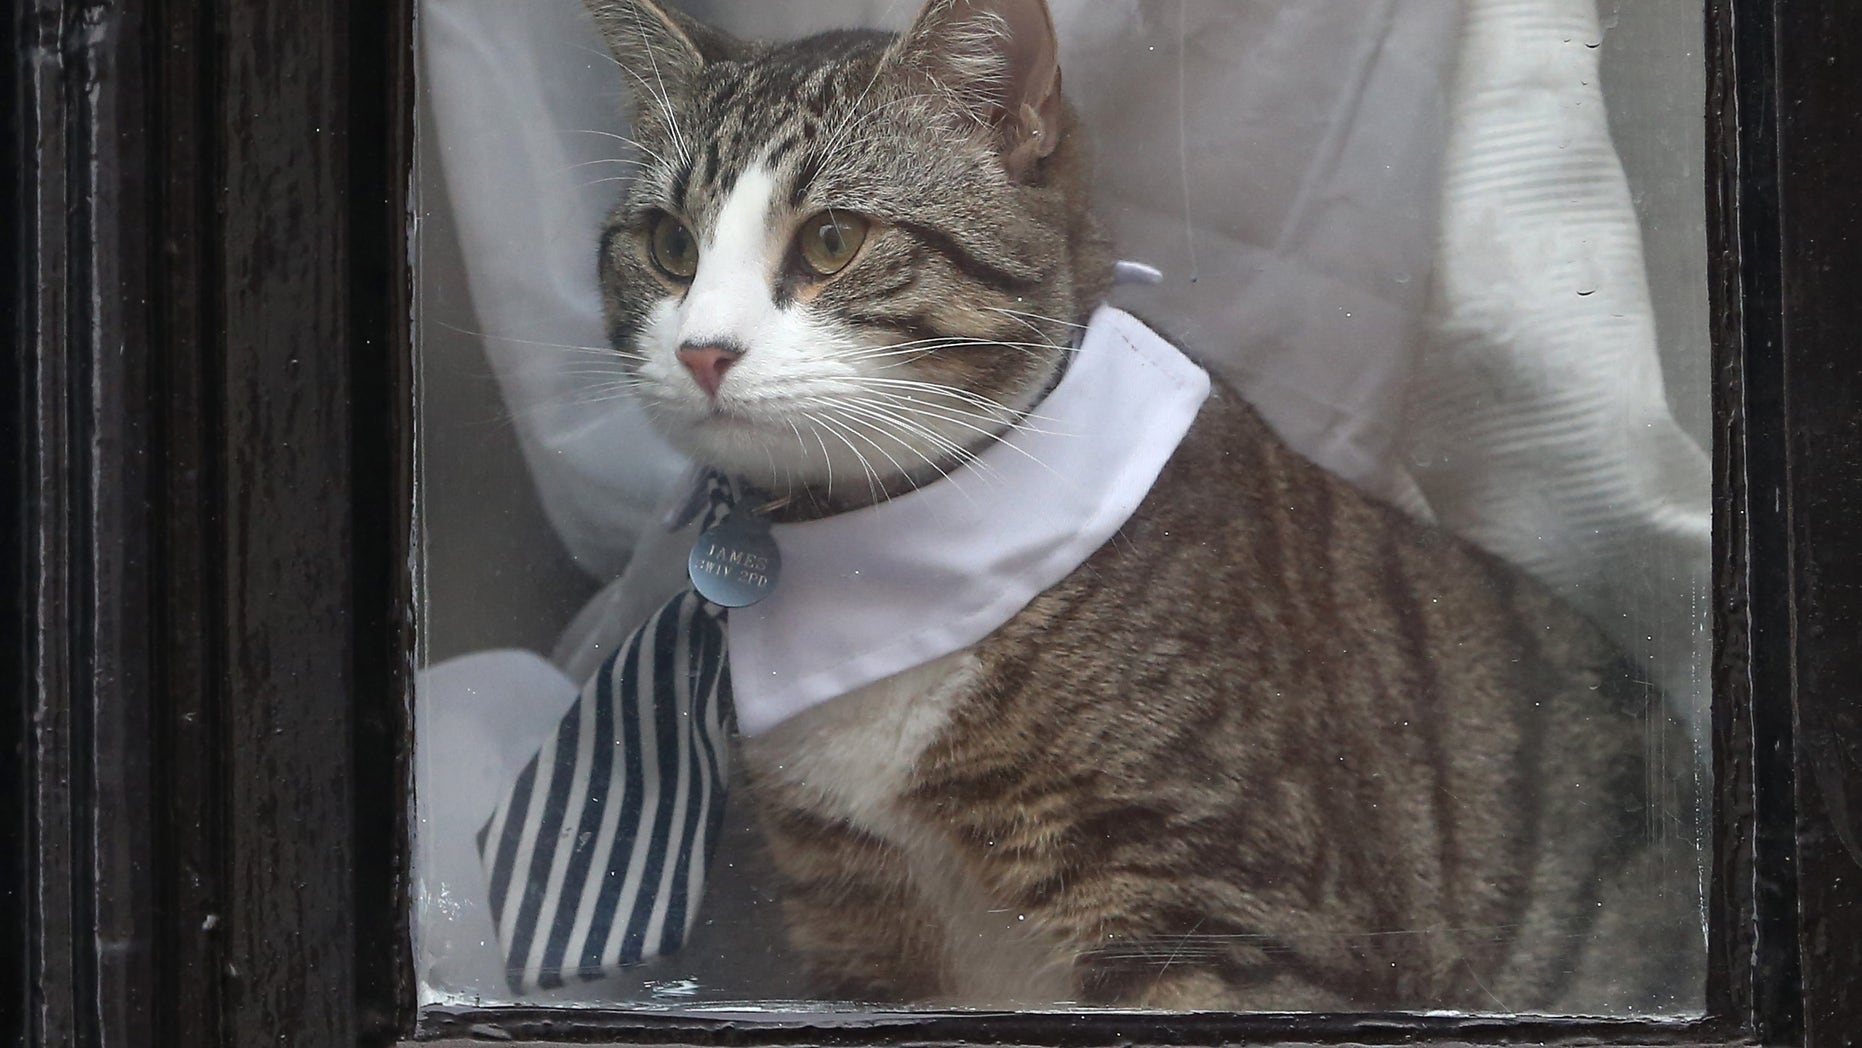 Assange's cat dressed to impress for owner's grilling | Fox News